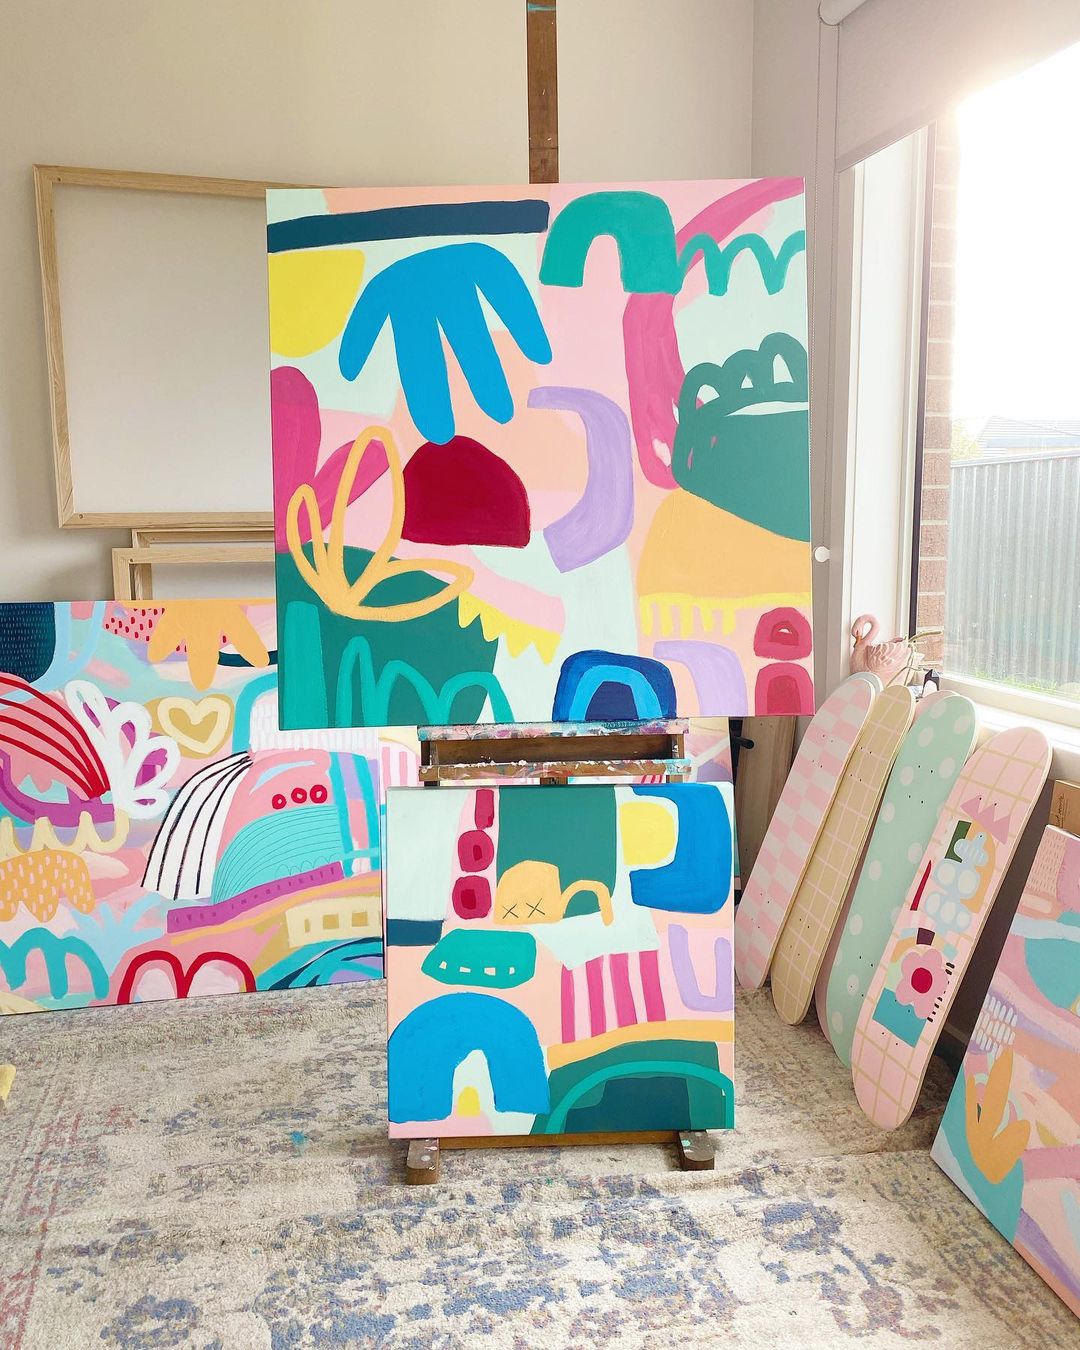 An abstract pastel artwork on an easel with skateboards next to the easel on the wall all painted with a pastel abstract design.